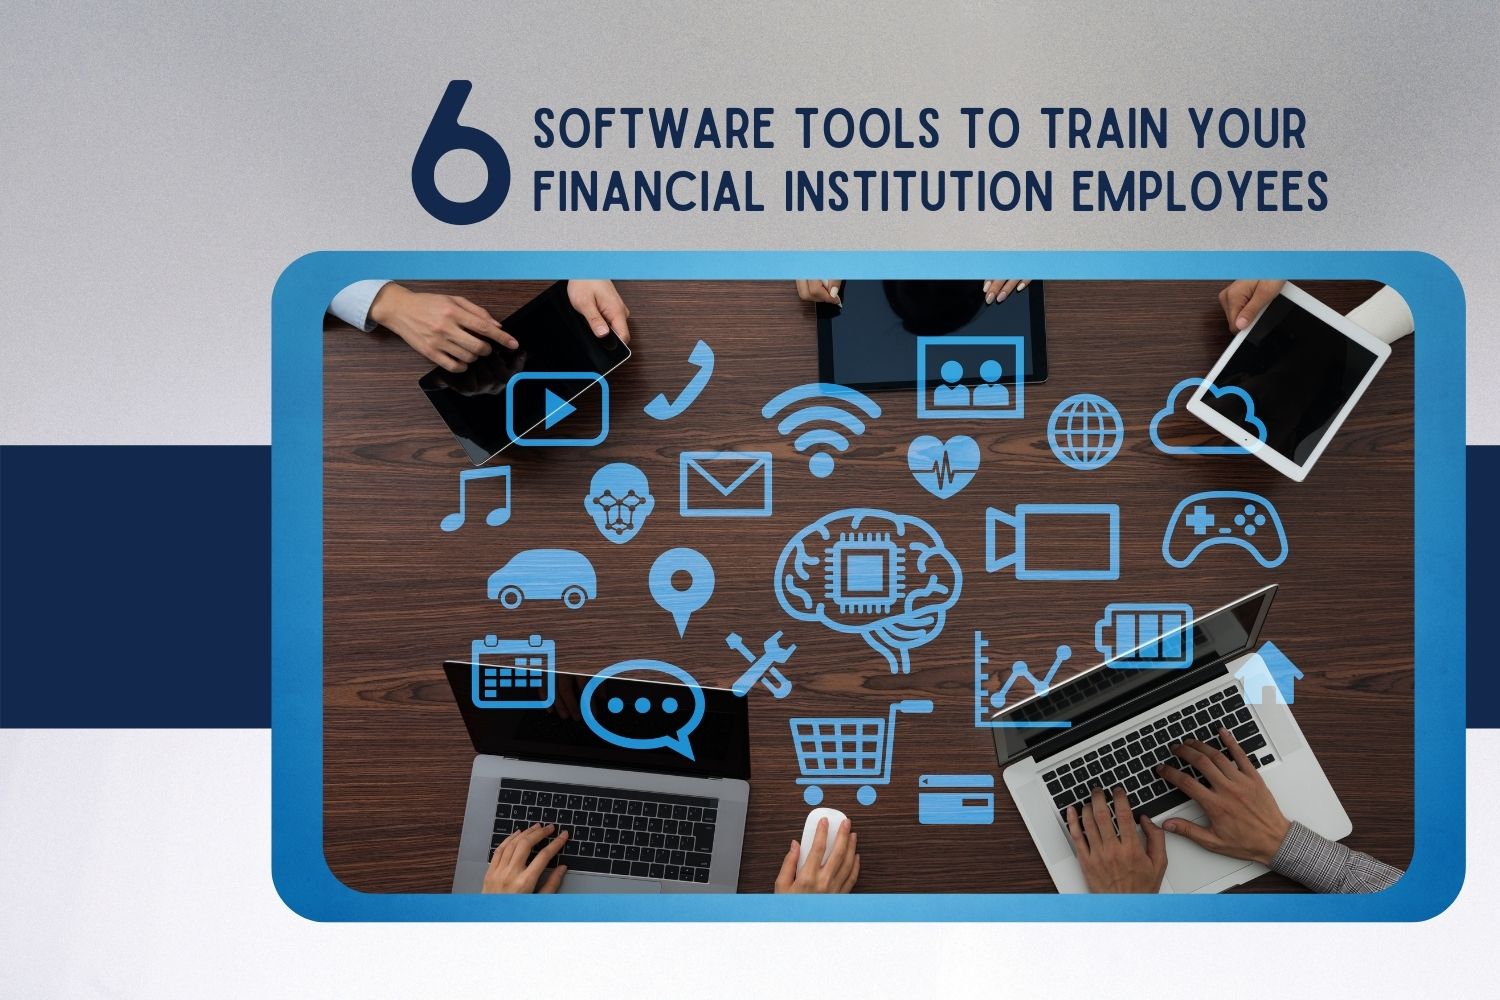 6 Software Tools to Train Your Financial Institution Employees